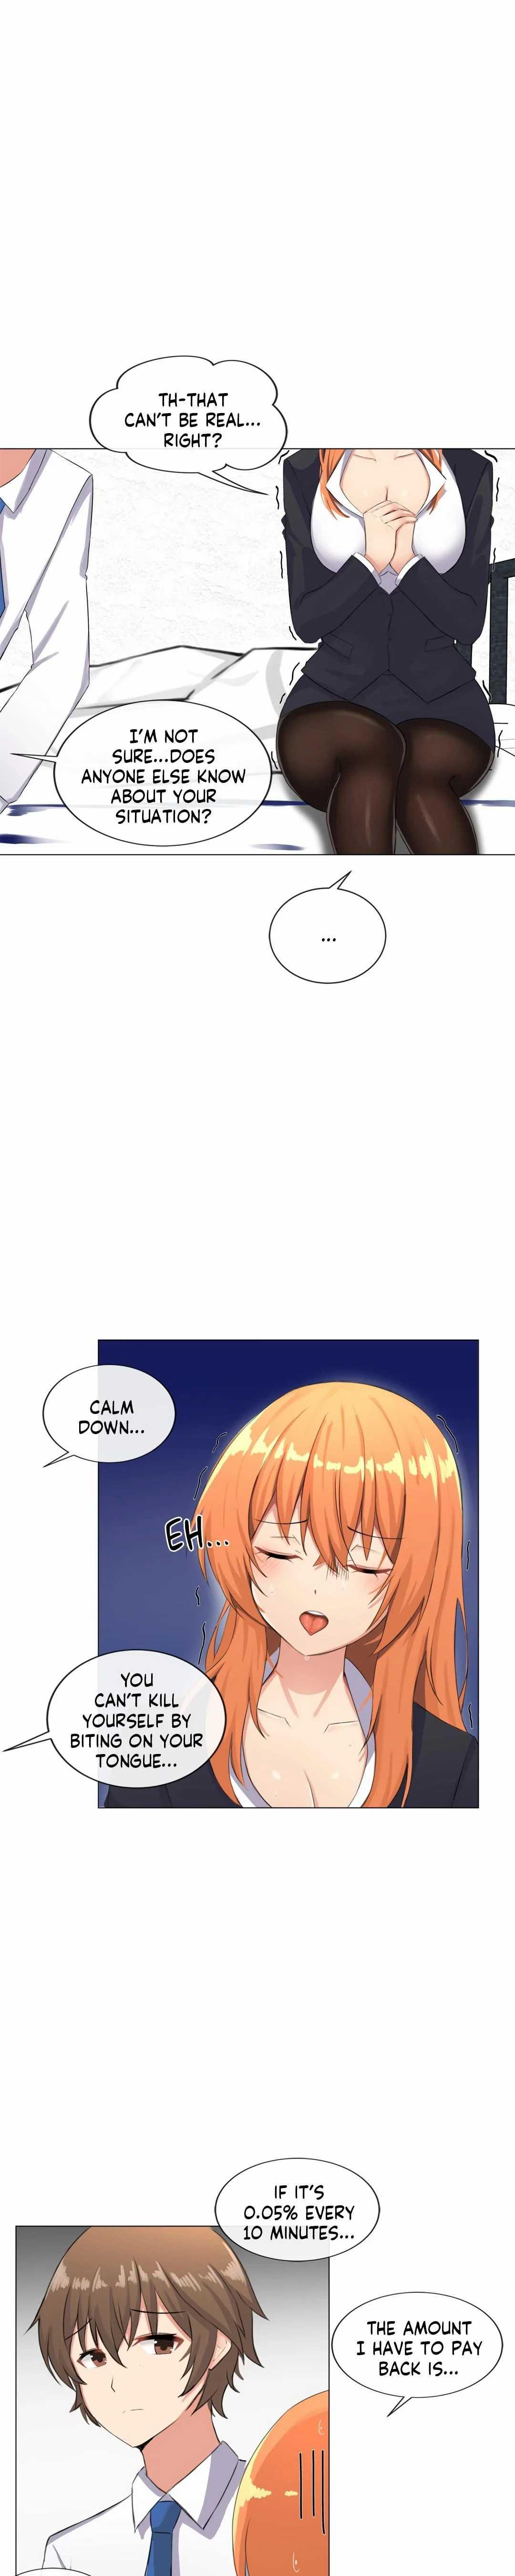 [Dumangoon, 130F] Sexcape Room: Pile Up Ch.9/9 [English] [Manhwa PDF] Completed 18